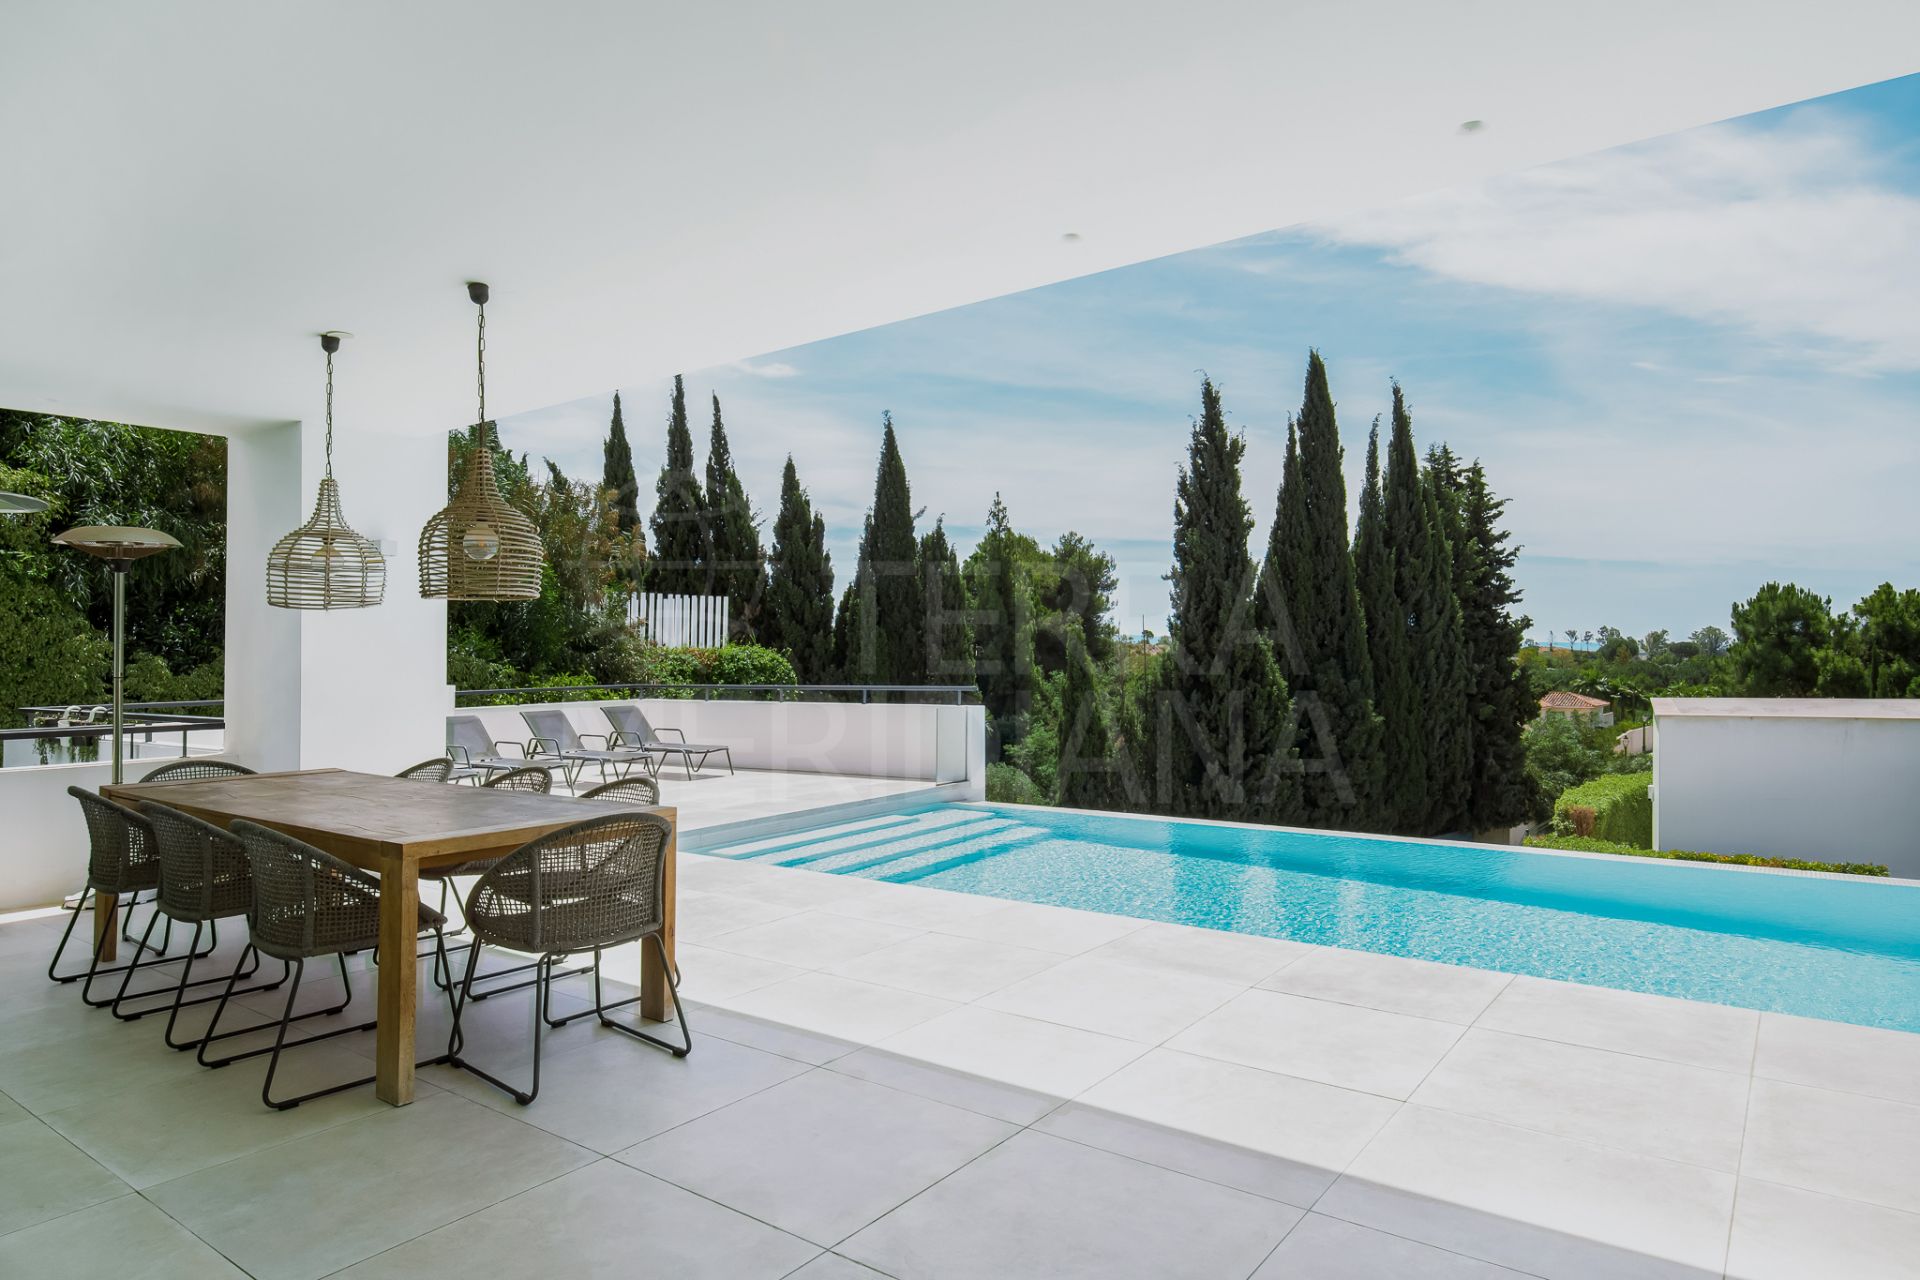 Luxury villa with an understated timeless design for sale in La Quinta, Benahavis